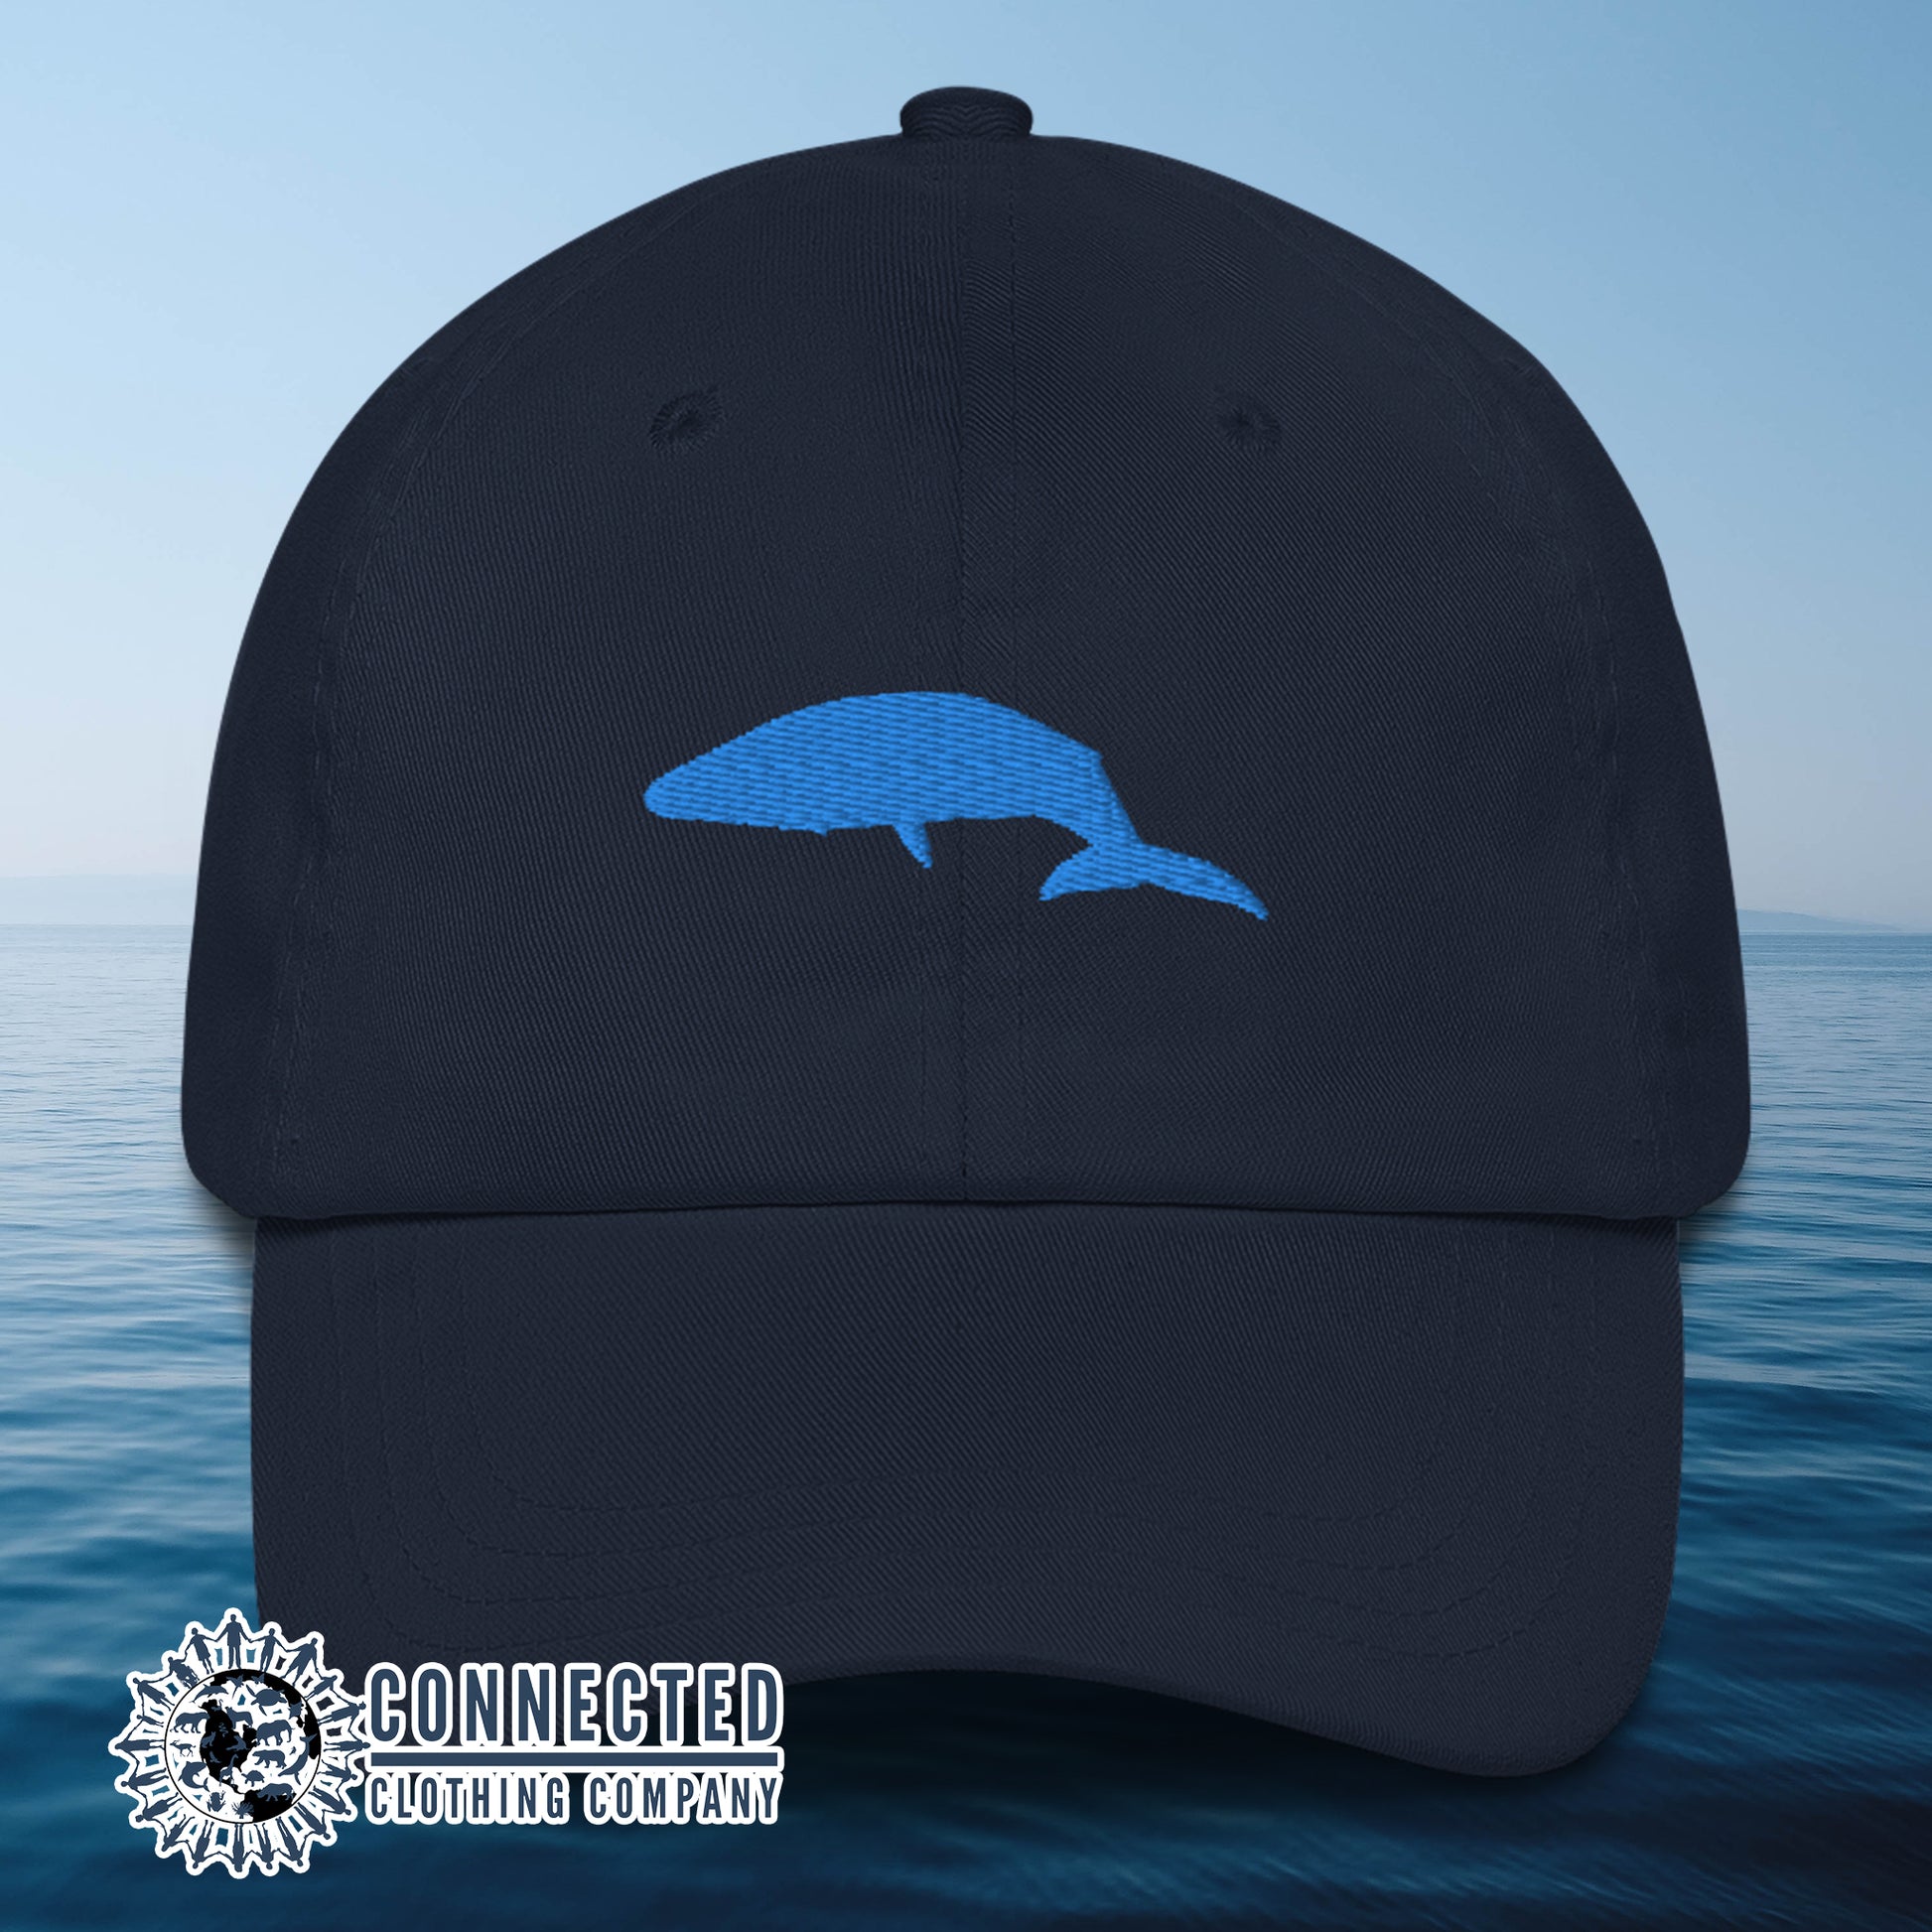 Navy Blue Blue Whale Cotton Cap - sweetsherriloudesigns - 10% of profits donated to Mission Blue ocean conservation